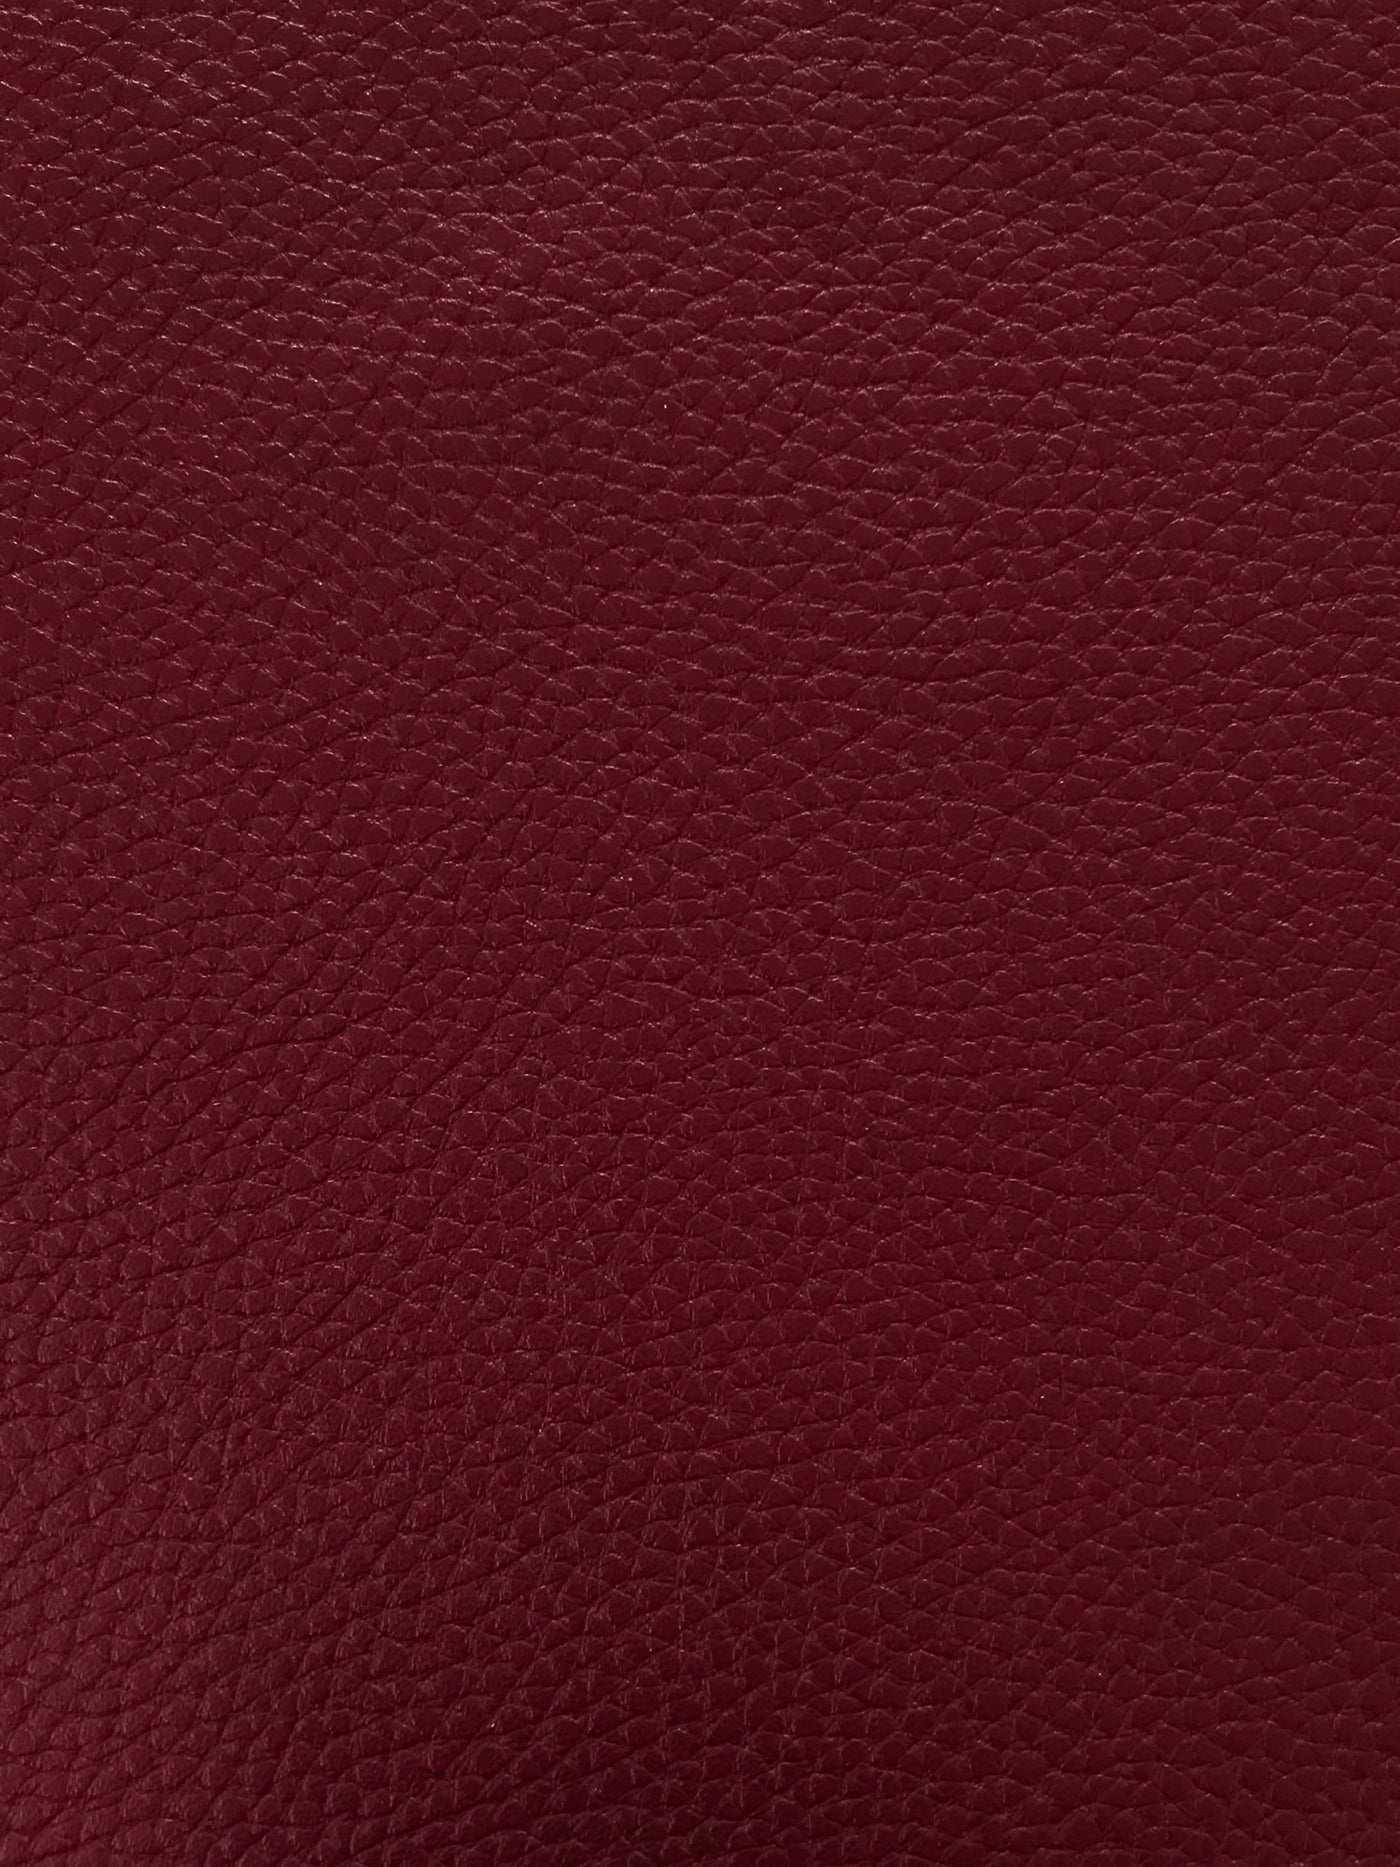 Marone Textured Leatherette Sheet Thick 1.0mm Litchi Print Leatherette